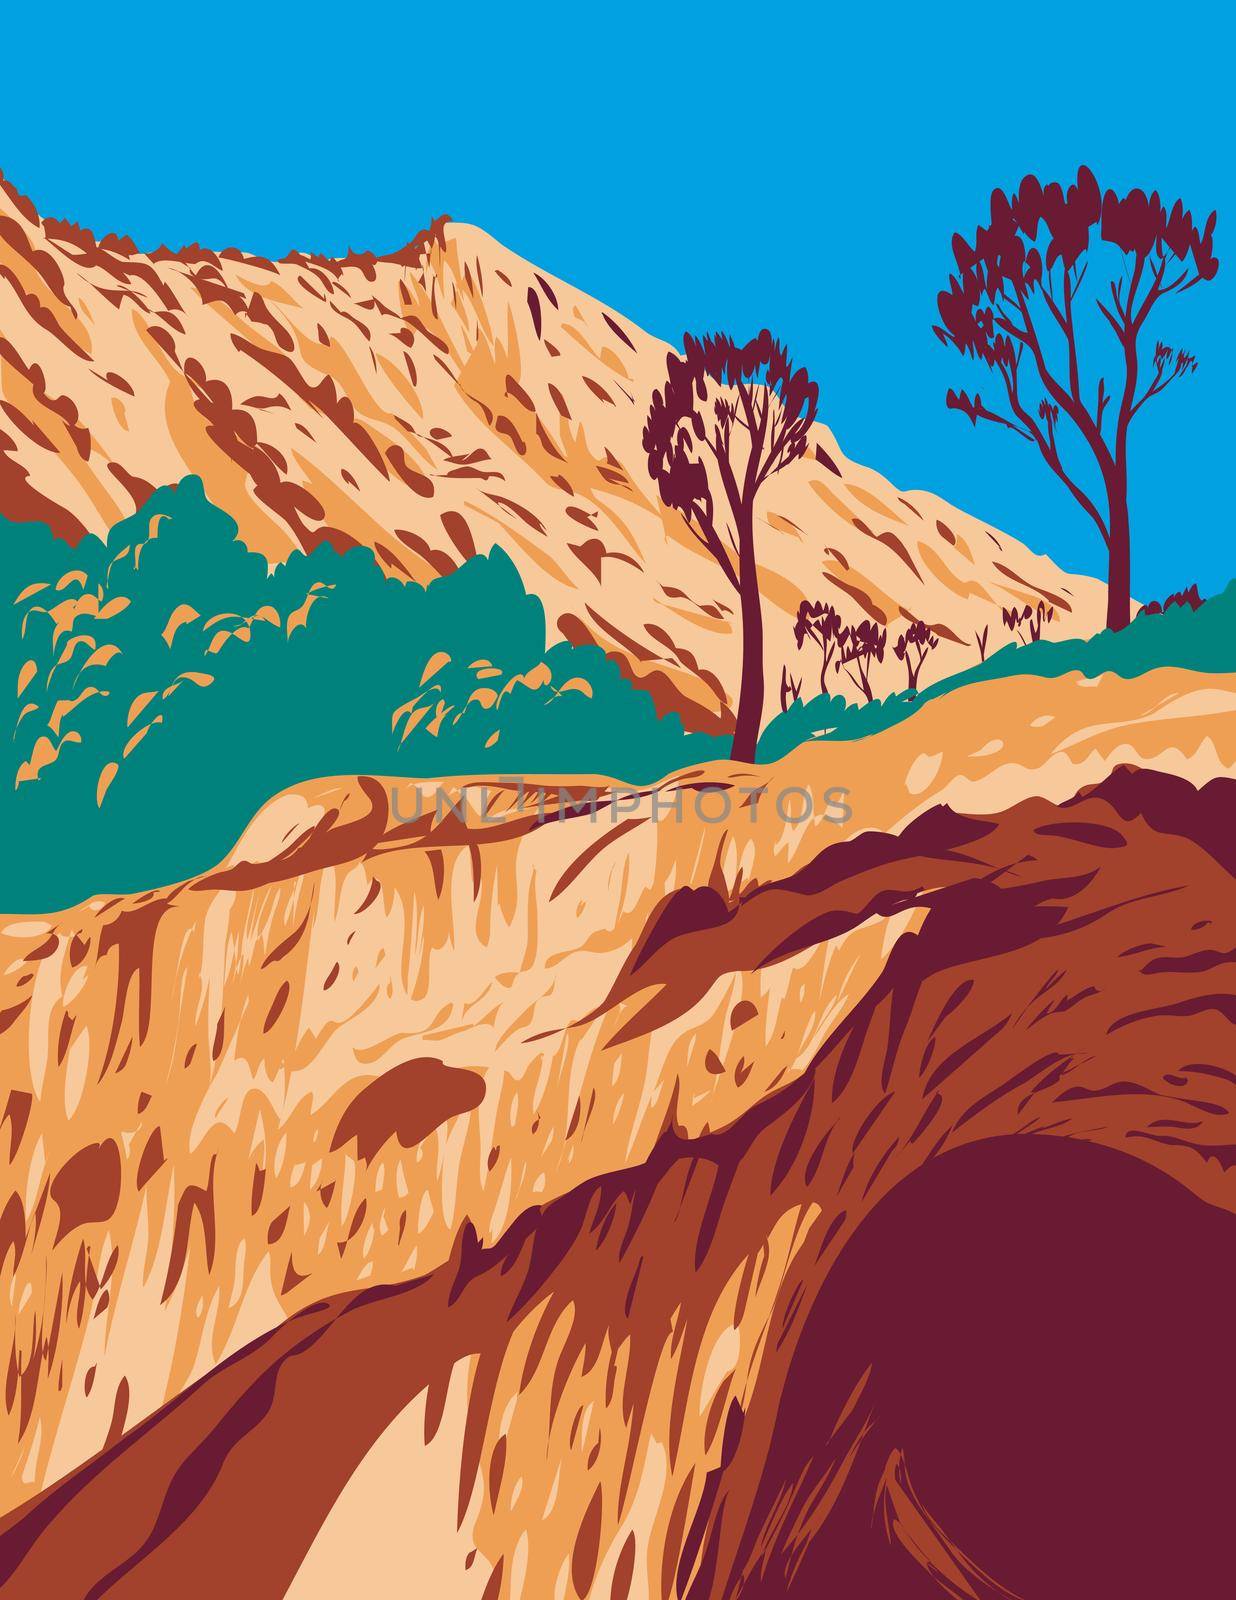 WPA poster art of Tonto Natural Bridge State Park the largest natural travertine bridge in the world located in Payson, Arizona, United States USA done in works project administration style.